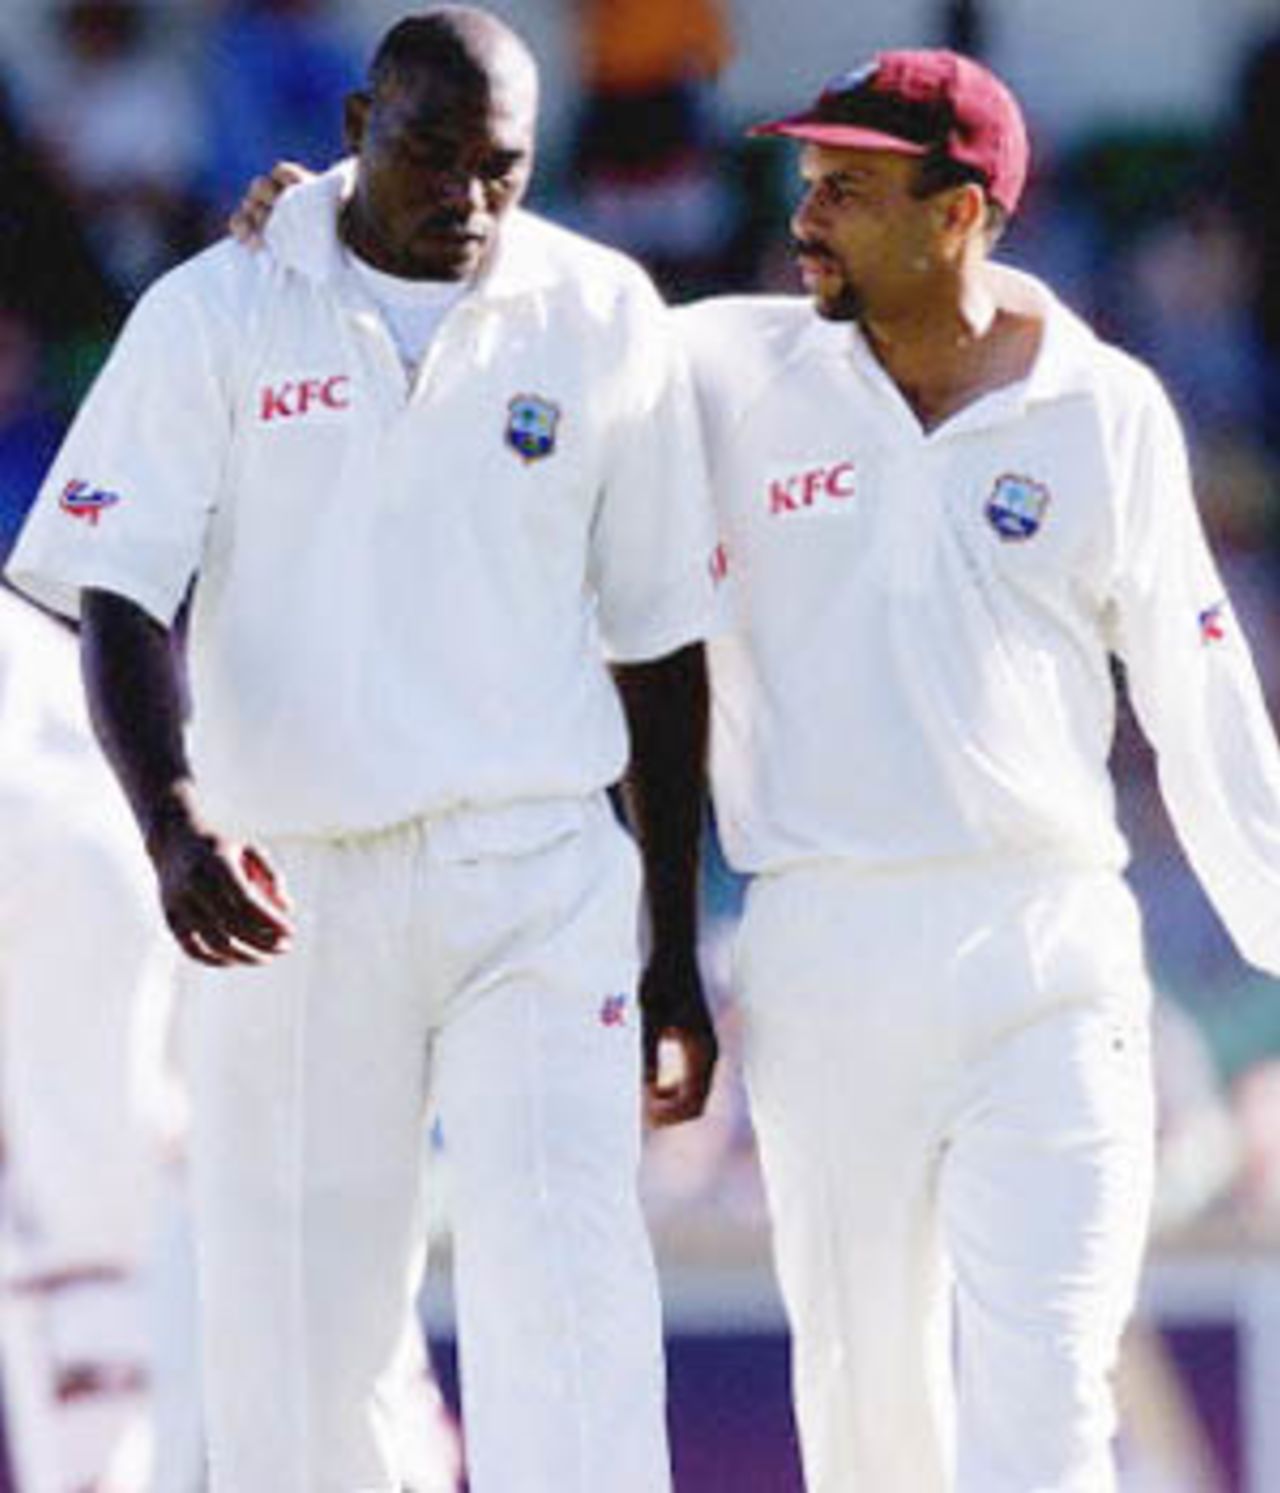 West Indies skipper has a quiet word with quickie Marlon Black, The Frank Worrell Trophy, 2000/01, 2nd Test, Australia v West Indies, W.A.C.A. Ground, Perth, 01-05 December 2000 (Day 1).